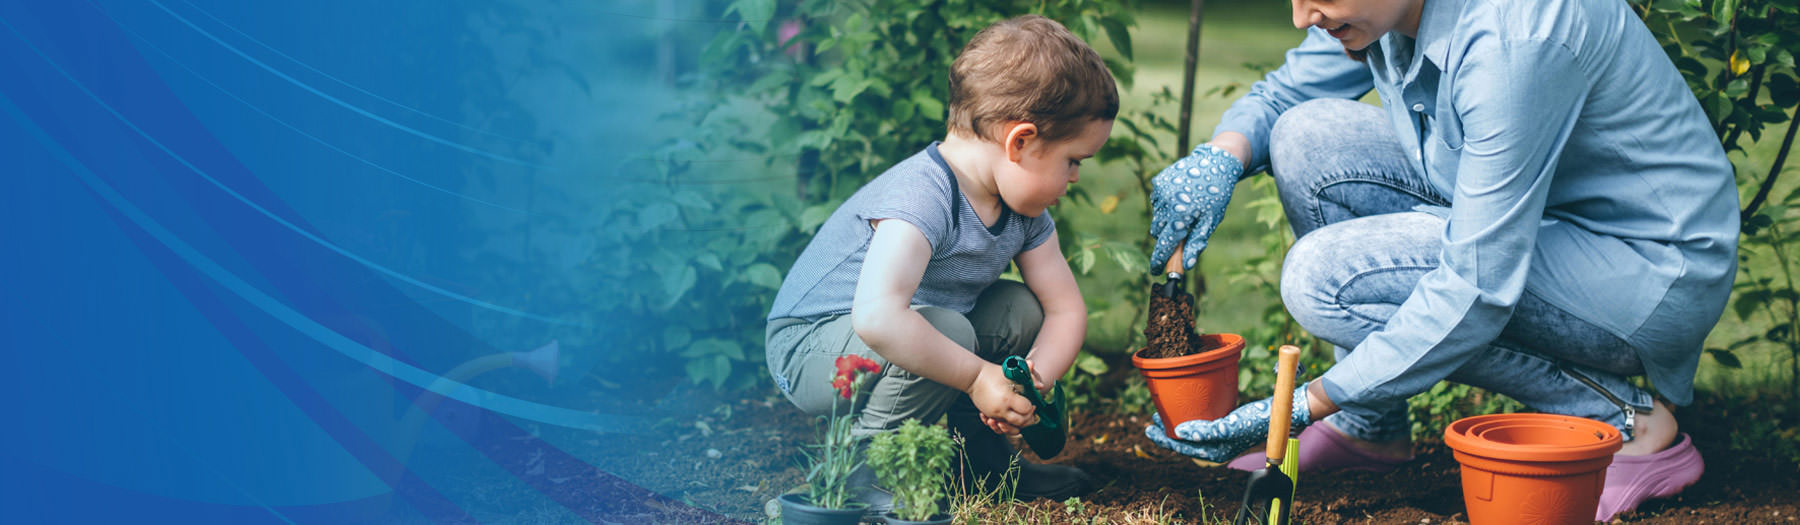 Parent and small child planting seeds in flowerpots near a garden